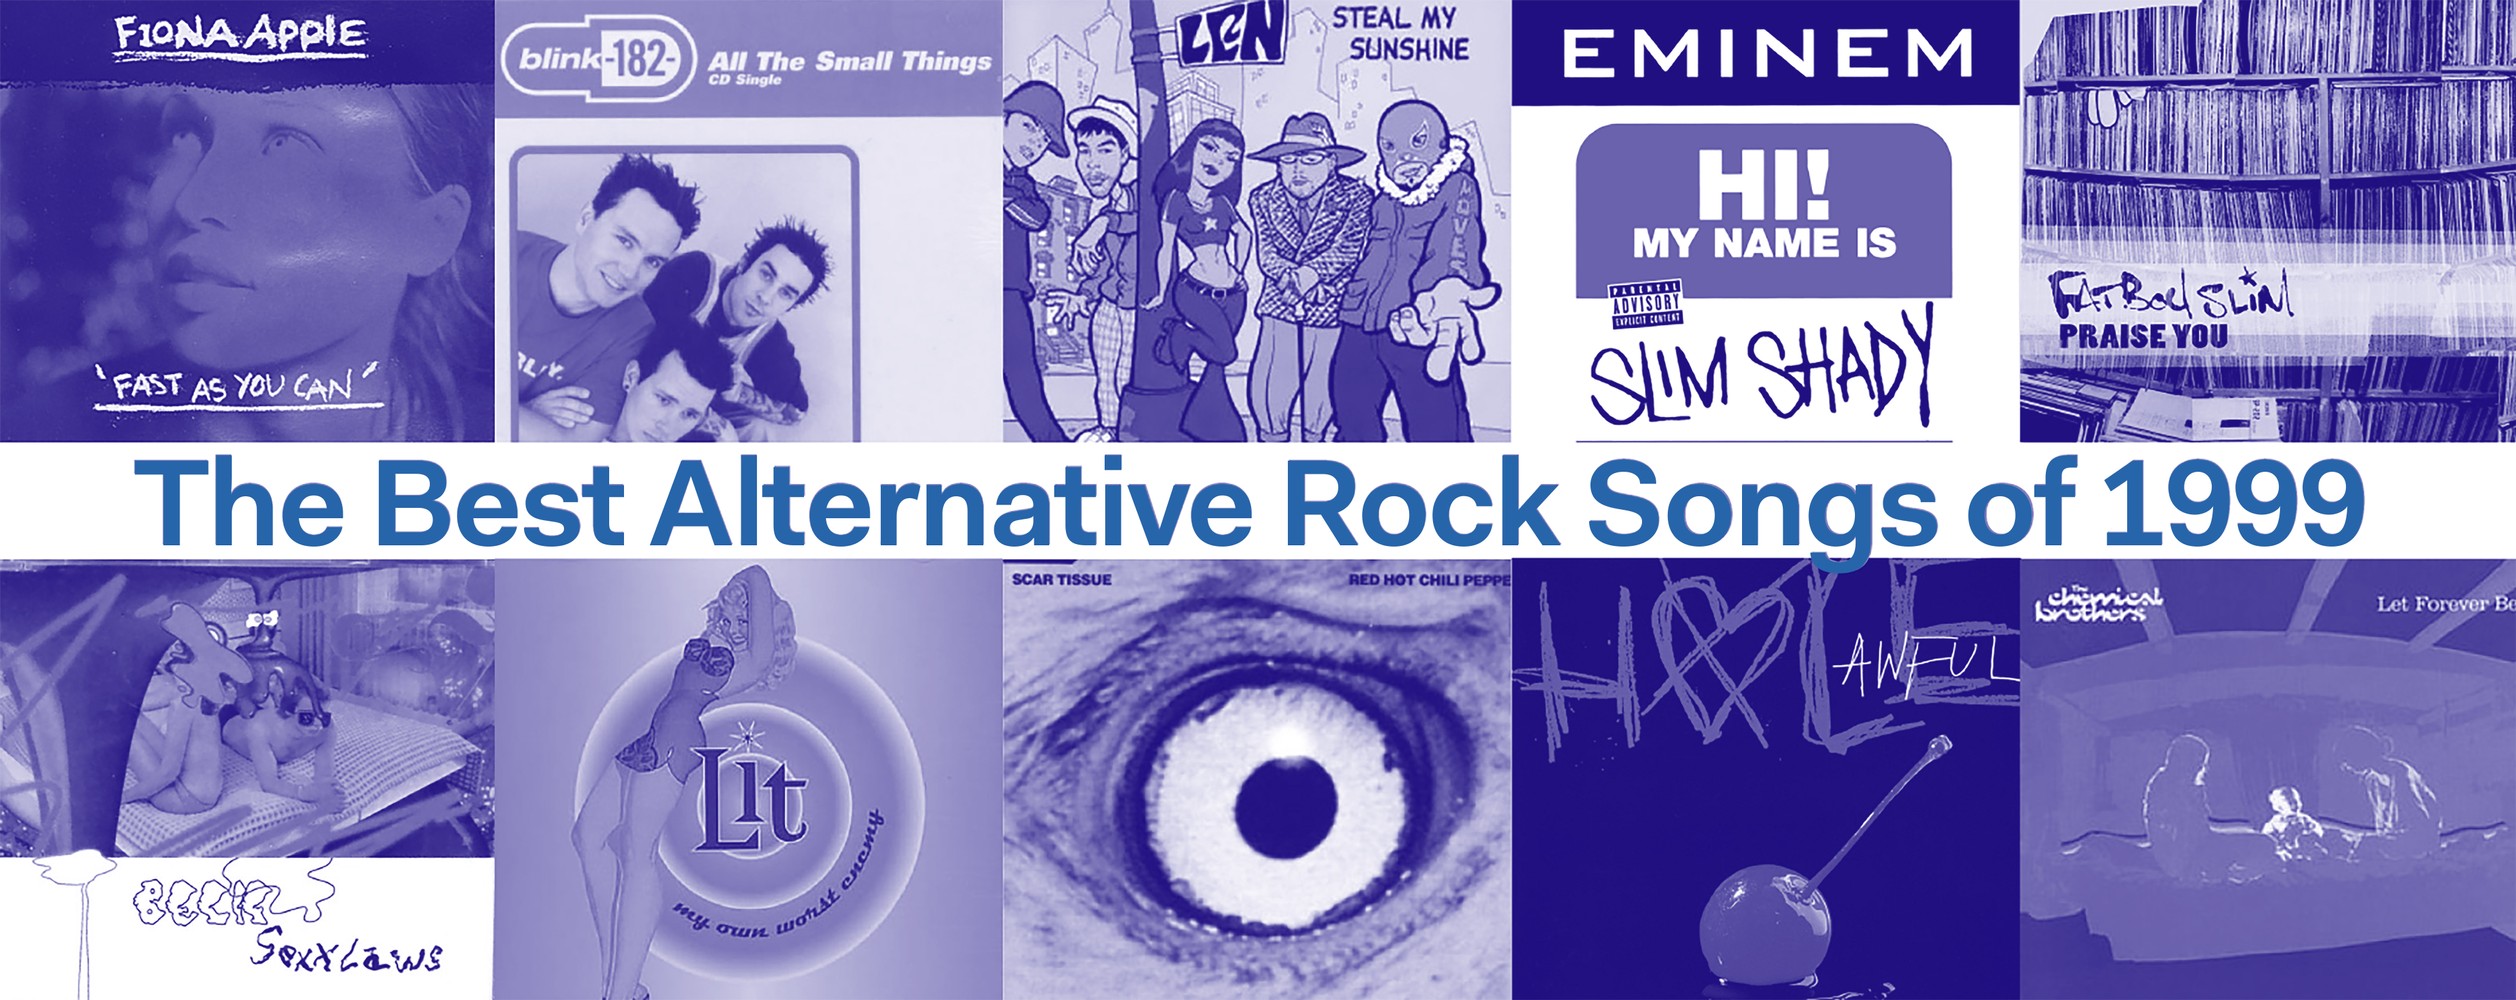 2516px x 1000px - The Best Alternative Rock Songs of 1999 | SPIN - Page 2